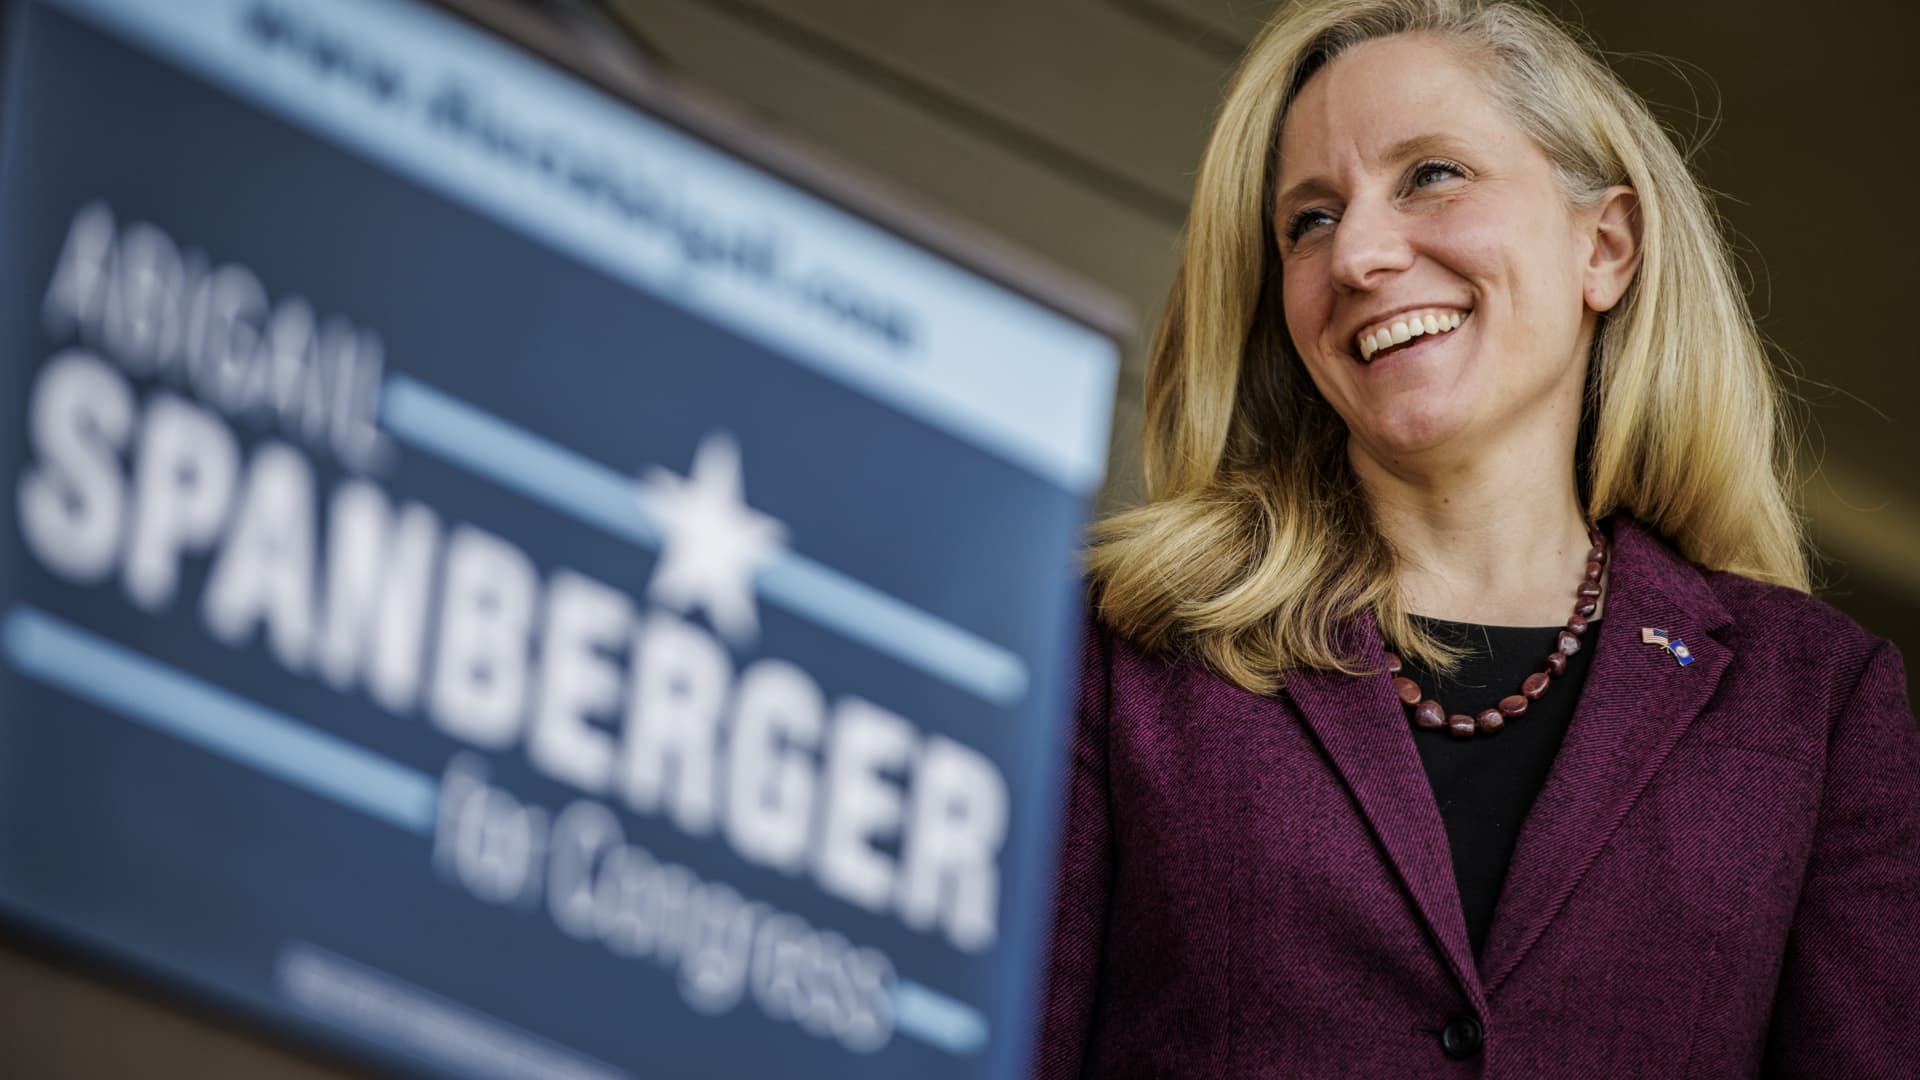 U.S. Rep. Abigail Spanberger (D-VA) during a press conference with Moore Hallmark, Vice President of the U.S. Chamber of Commerce, and Brian Lam, a local business owner, outside of Collage Spa on November 3, 2022 in Fredericksburg, Virginia.